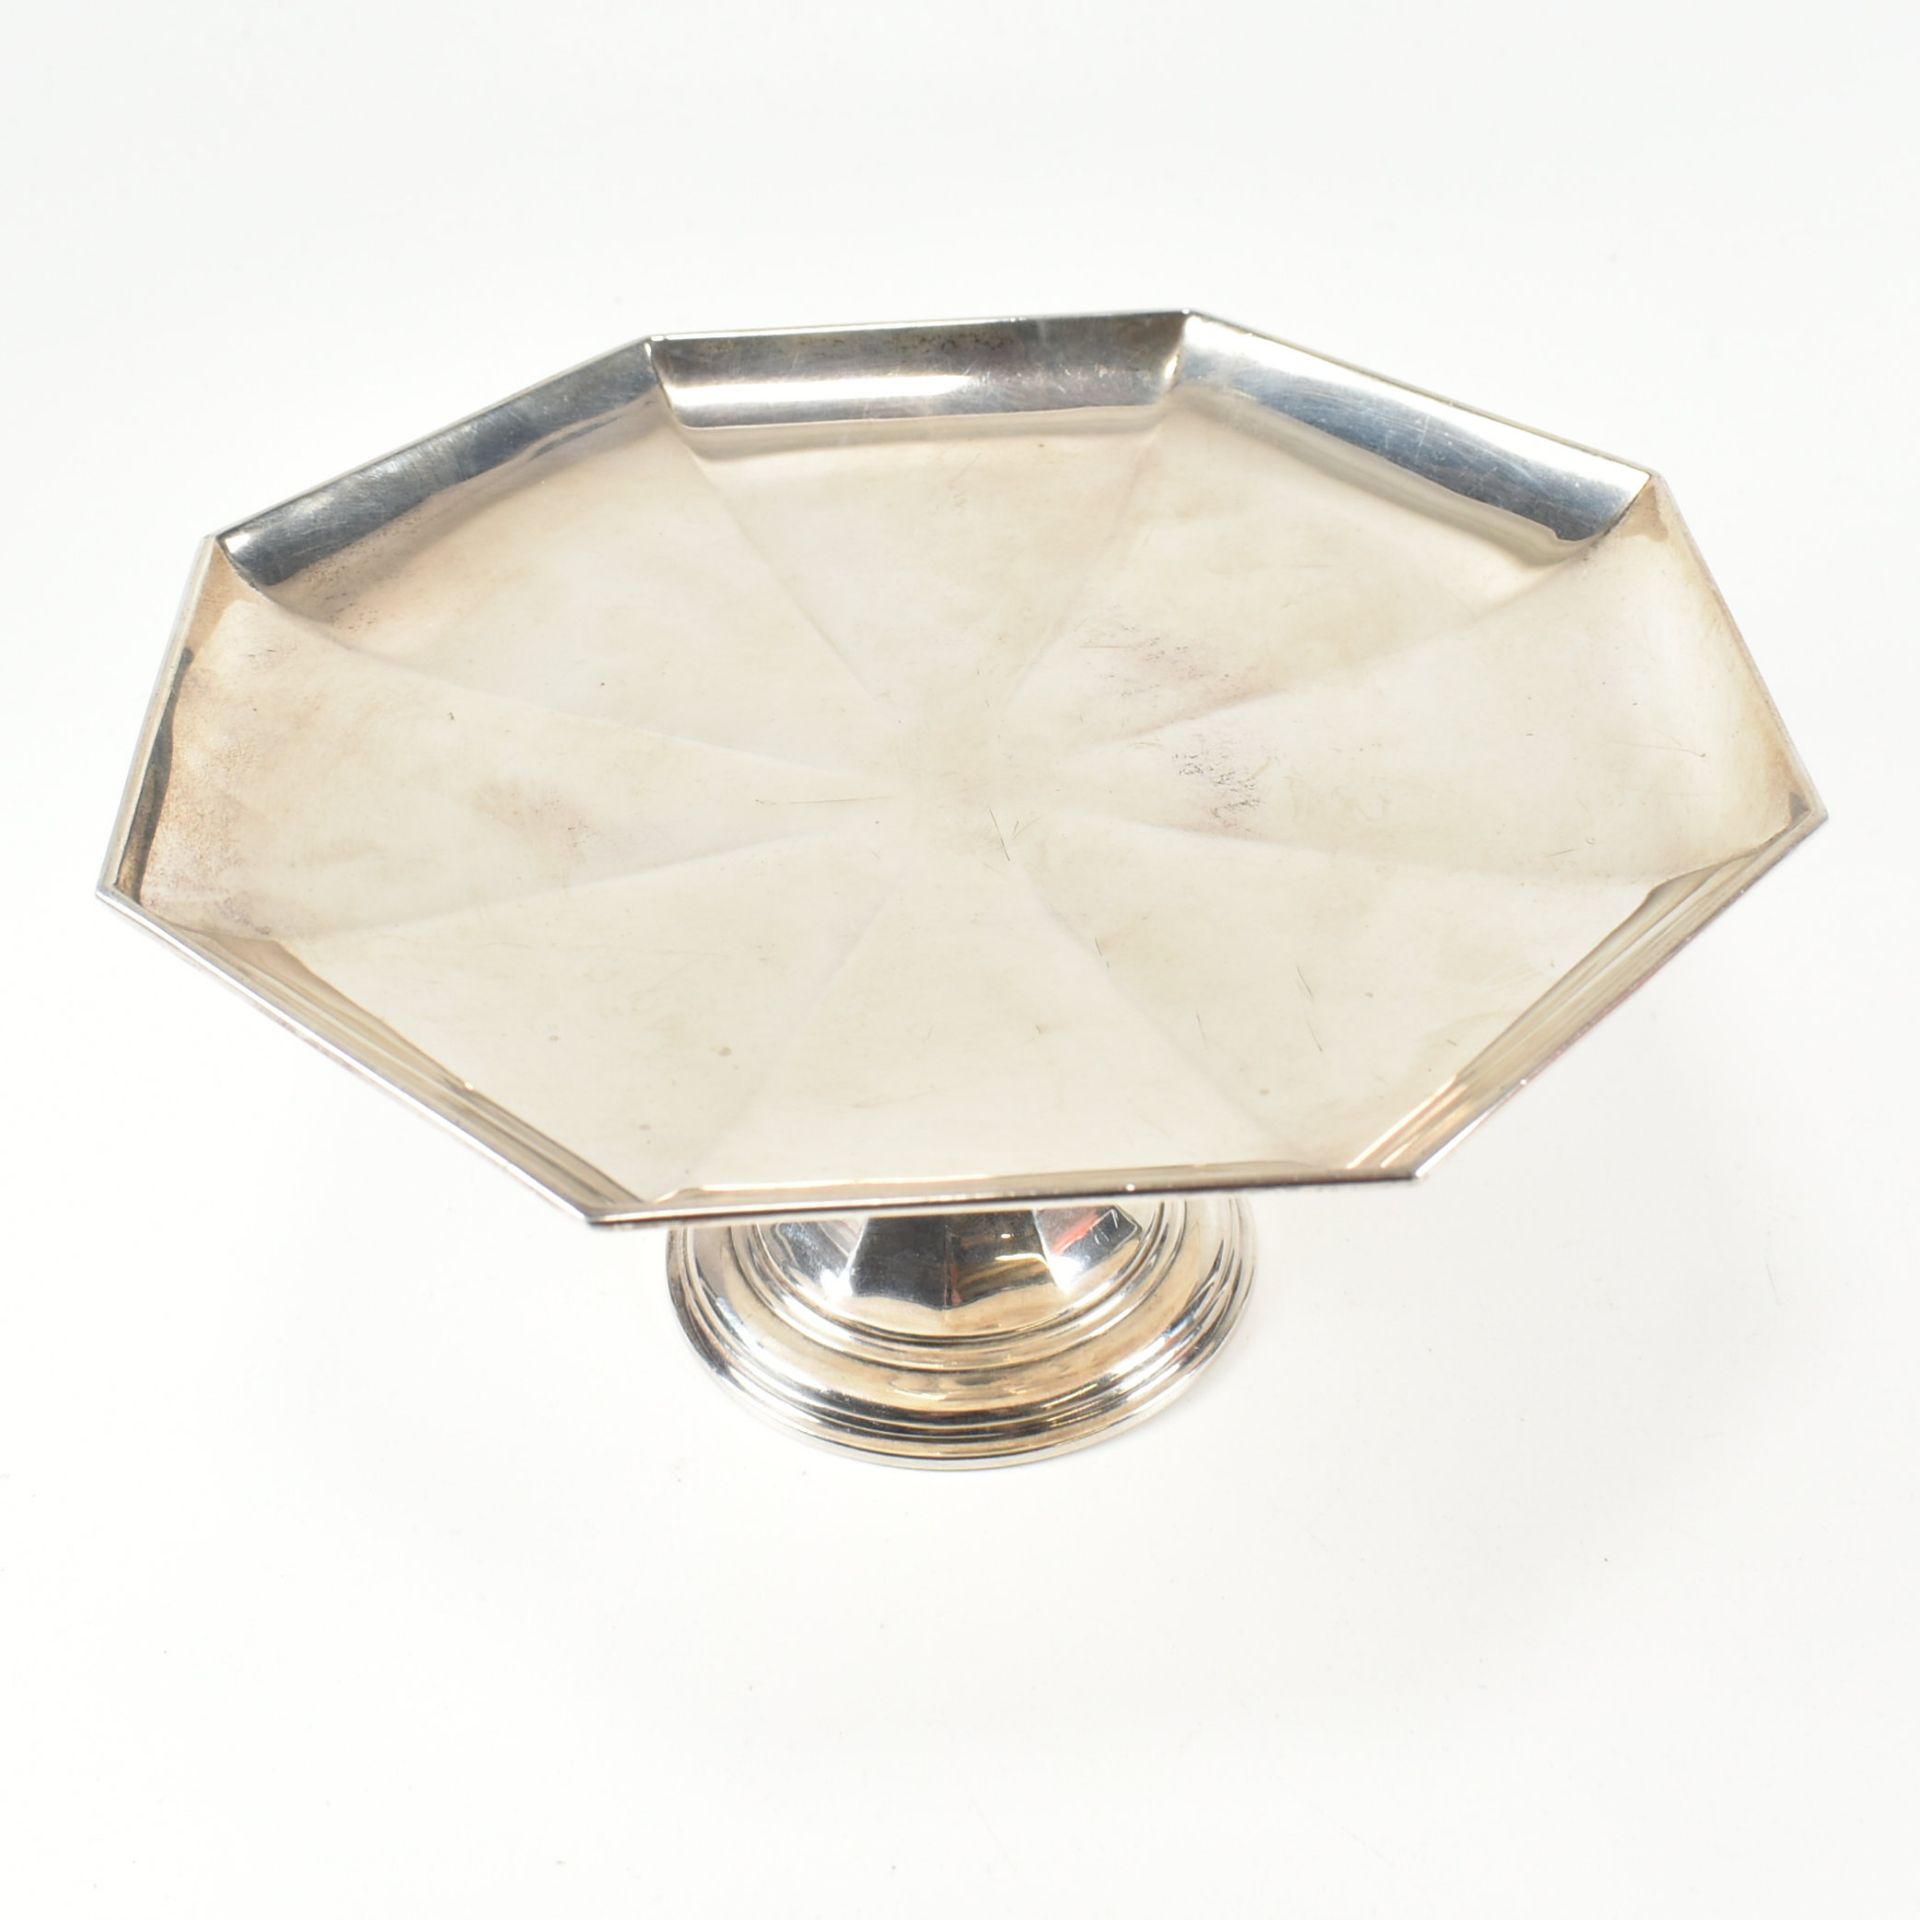 GEORGE V HALLMARKED SILVER CAKE STAND - Image 4 of 8